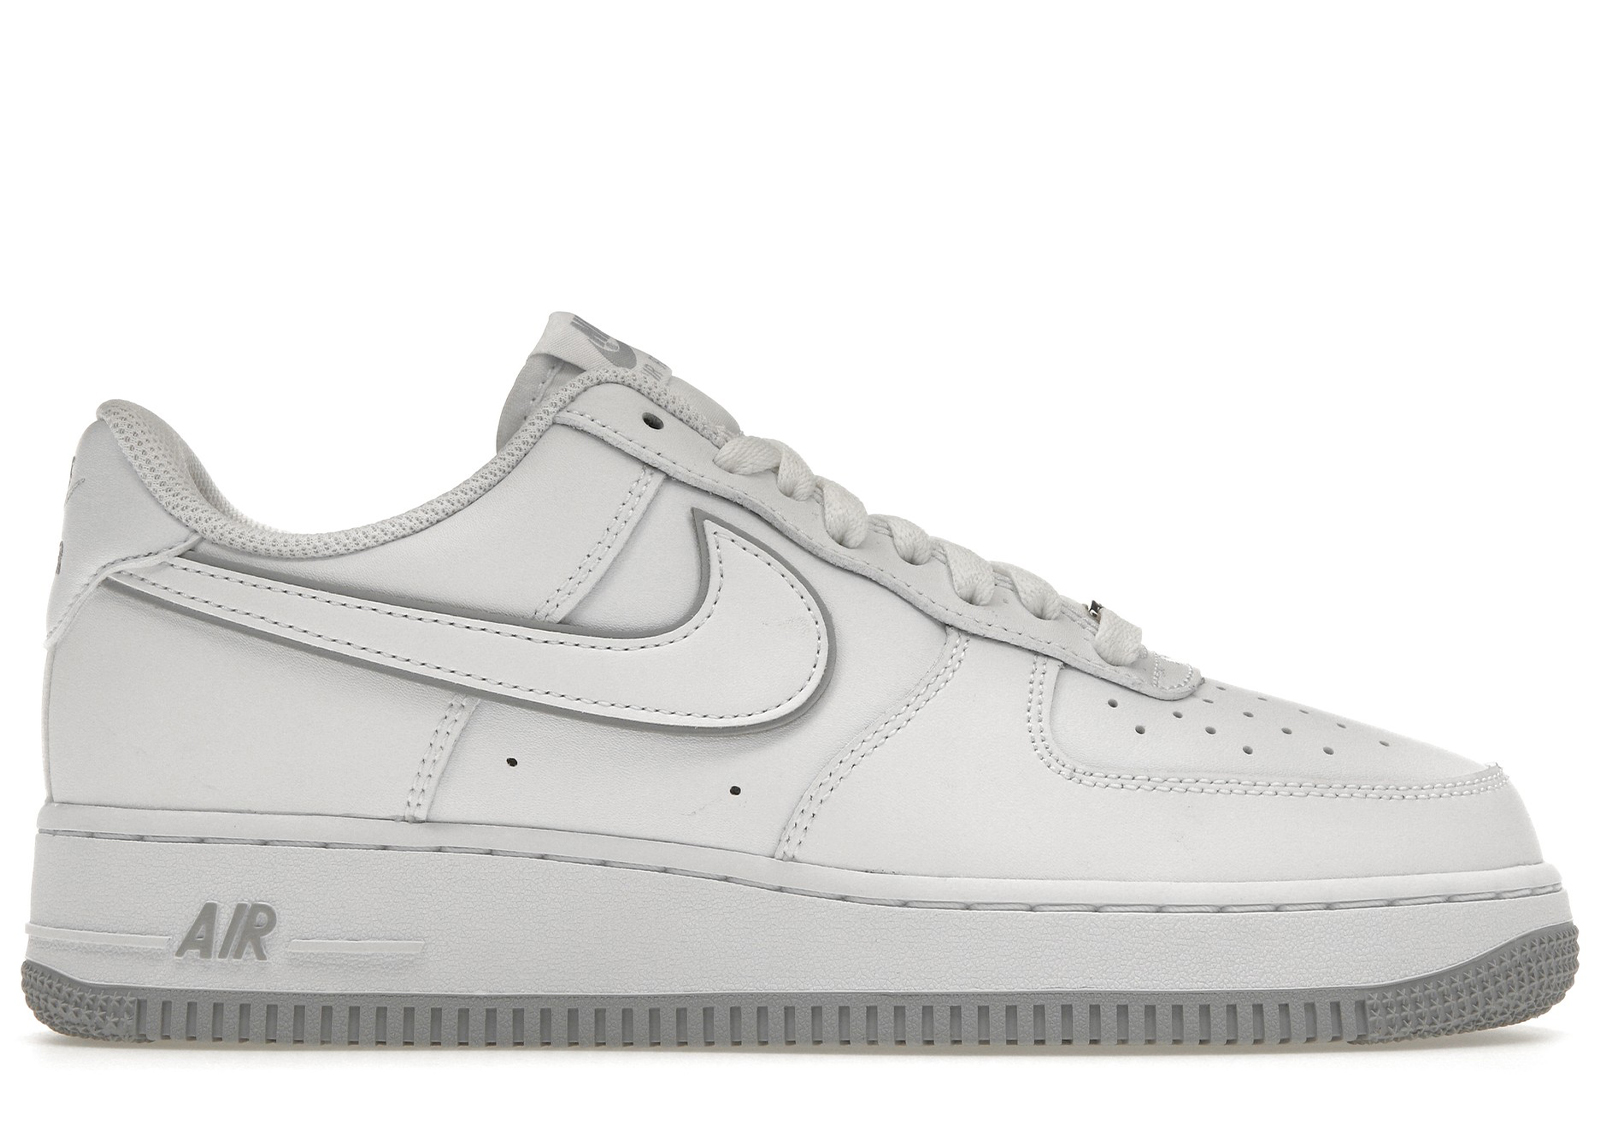 Air Force 1 Low ‘07 “Wolf Grey White”